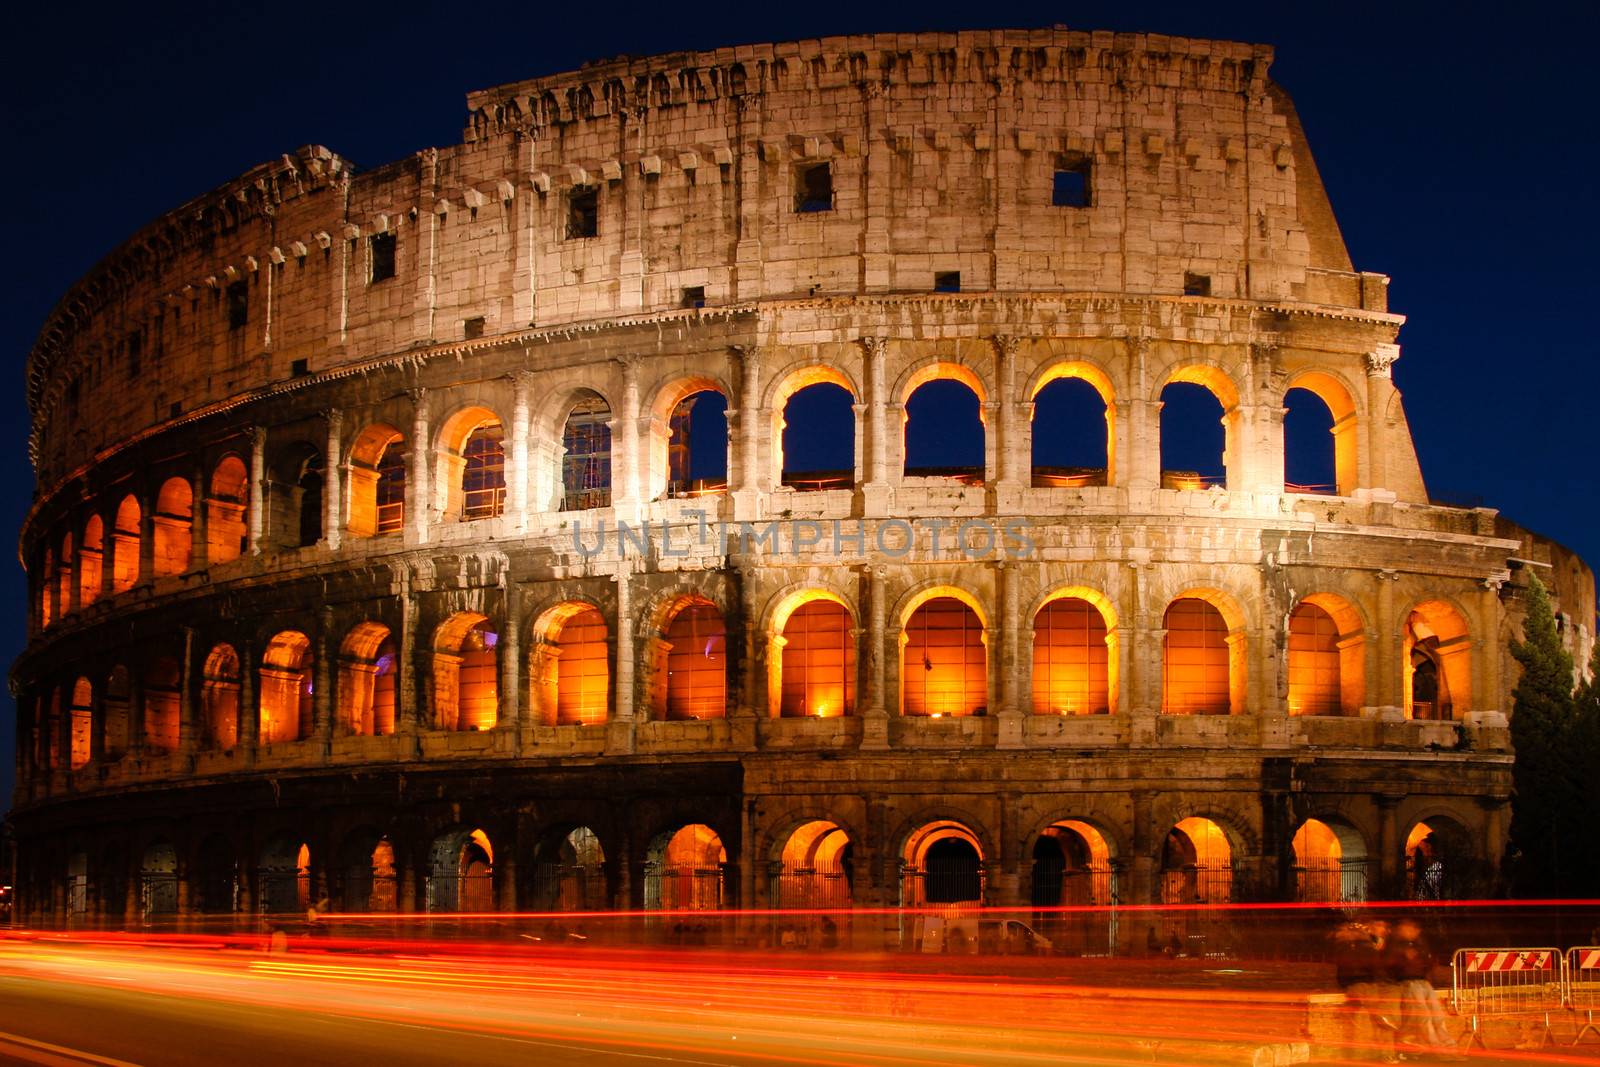 Night shot of the Coliseum in Rome, Italy by CelsoDiniz